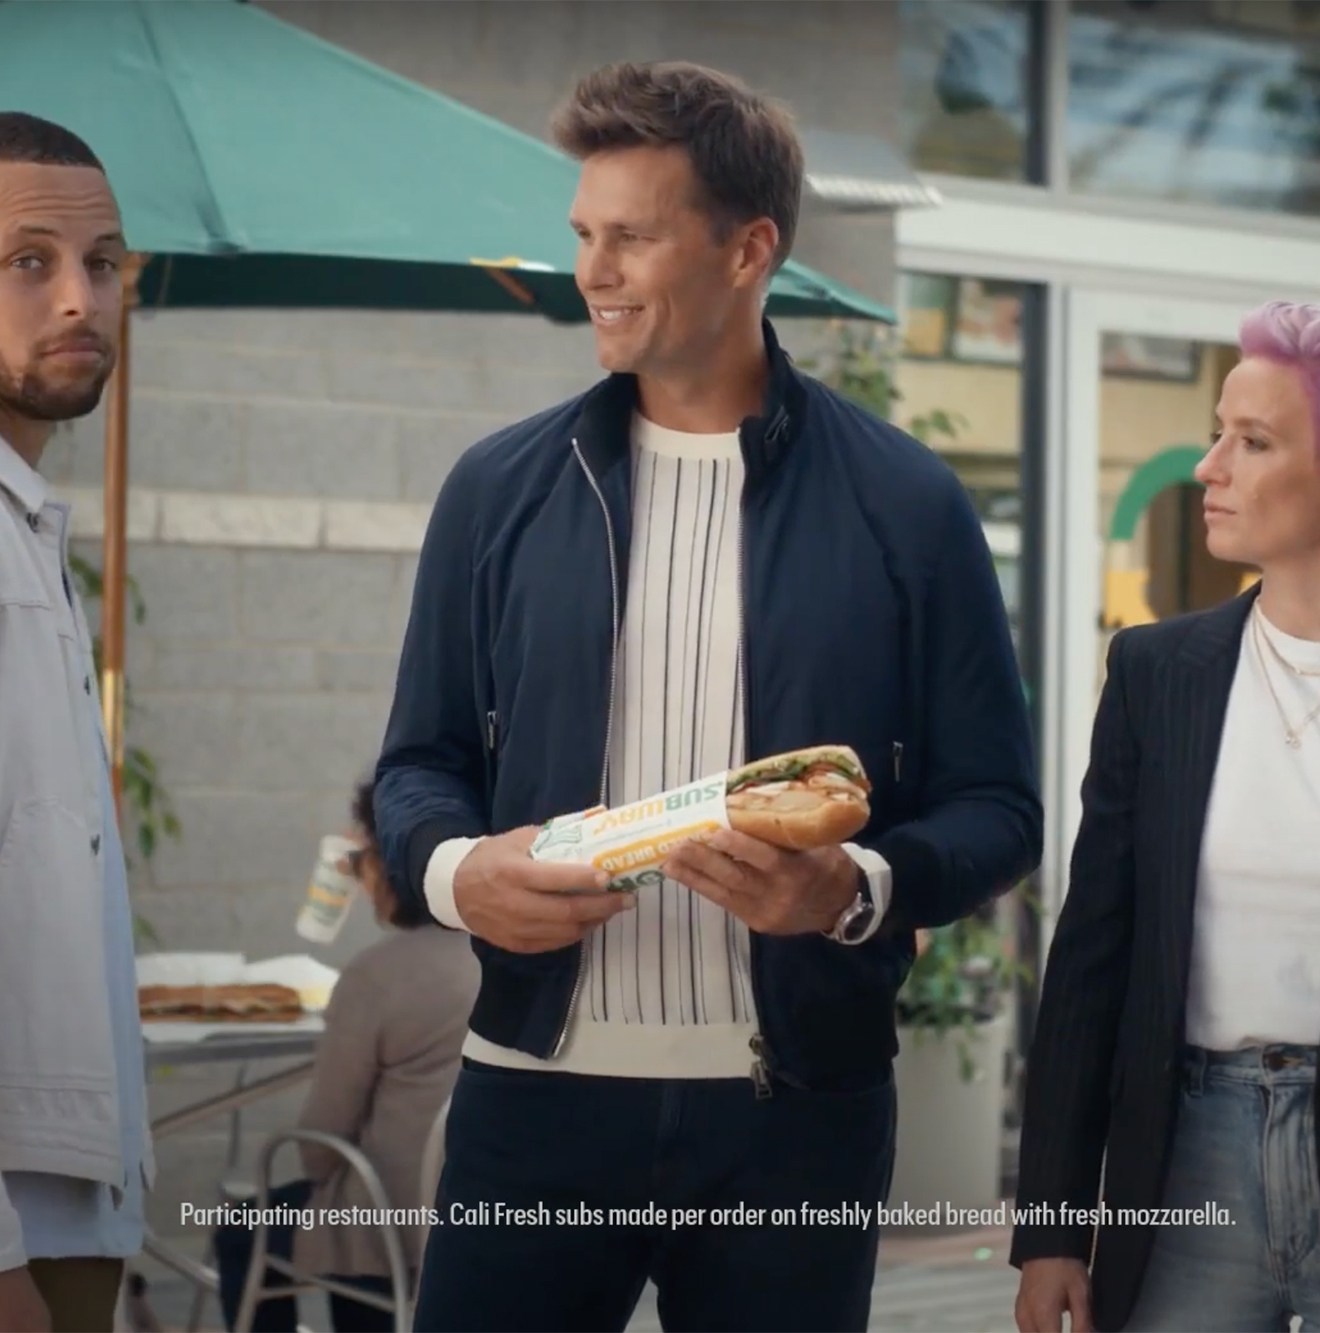 Why do all the world’s best athletes do Subway commercials?